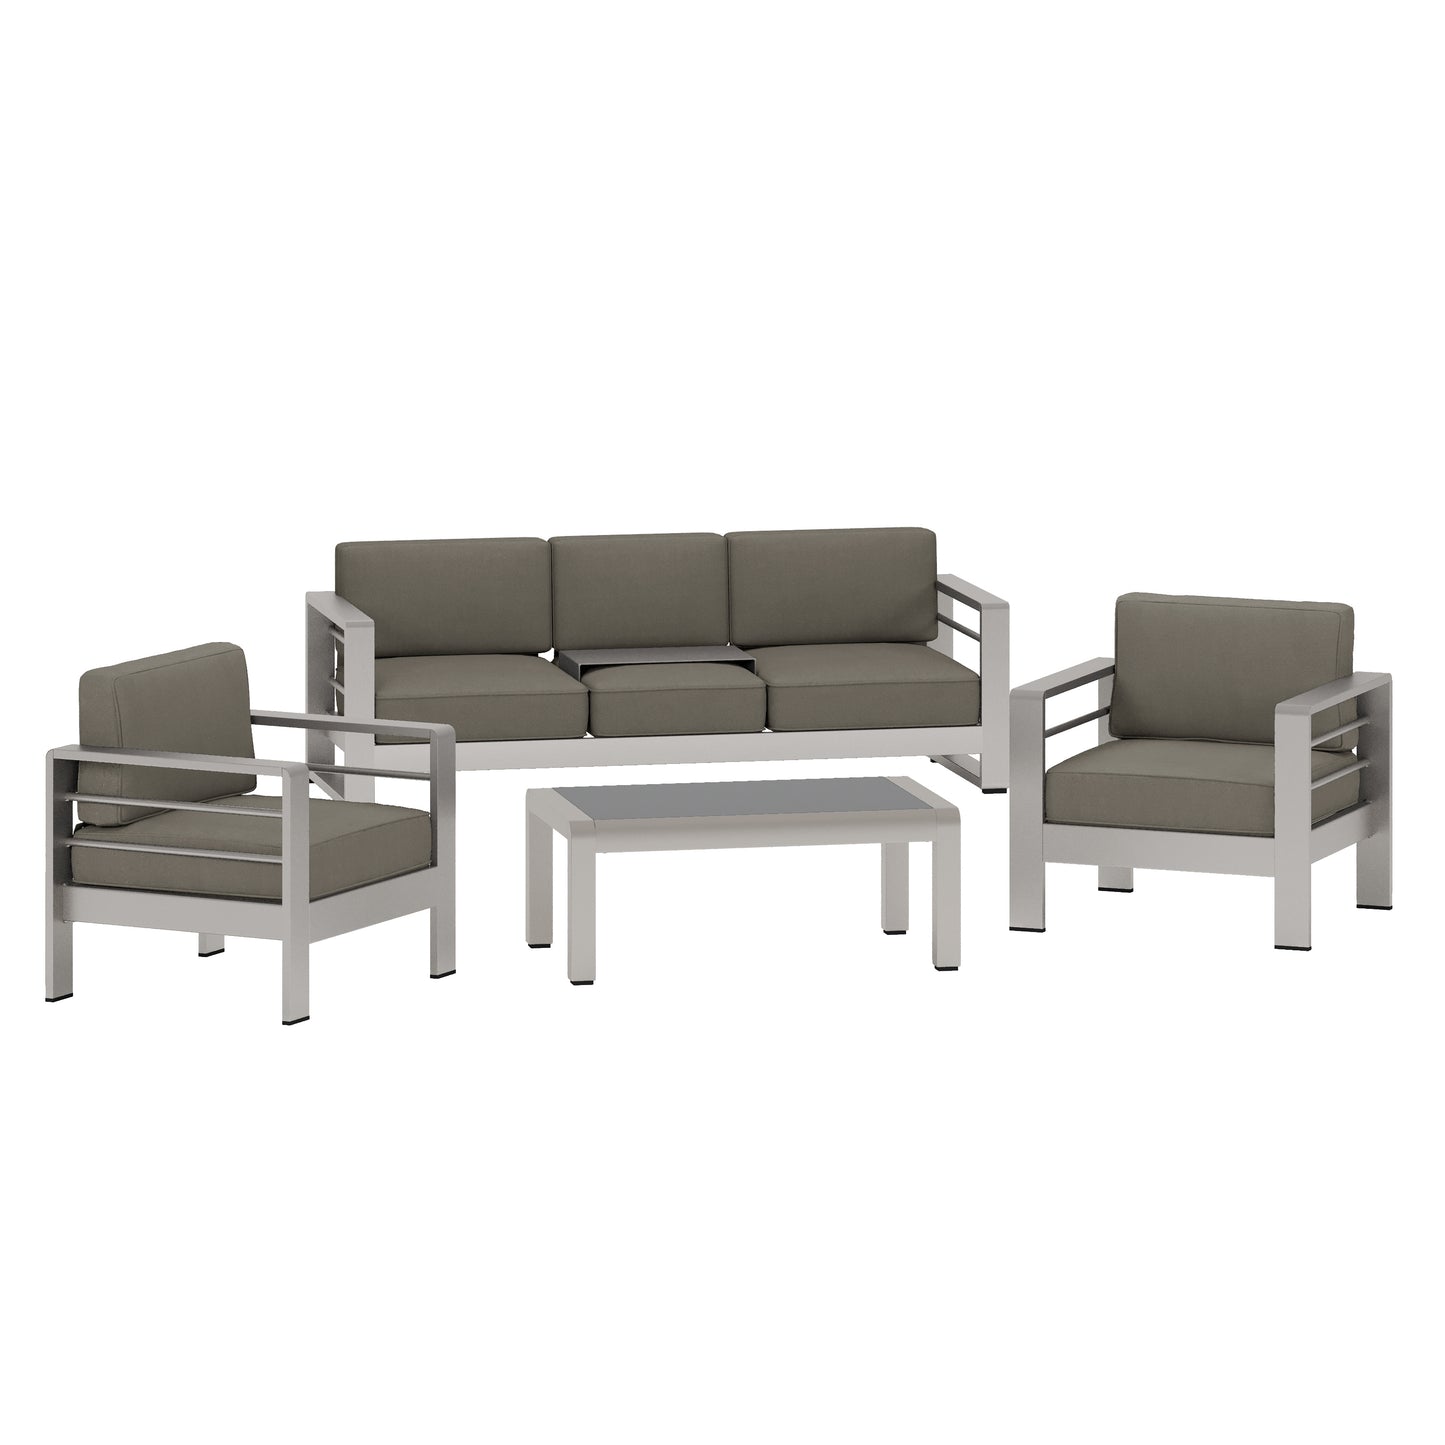 Coral Bay Outdoor 4 Piece Aluminum Chat Set with Cushions